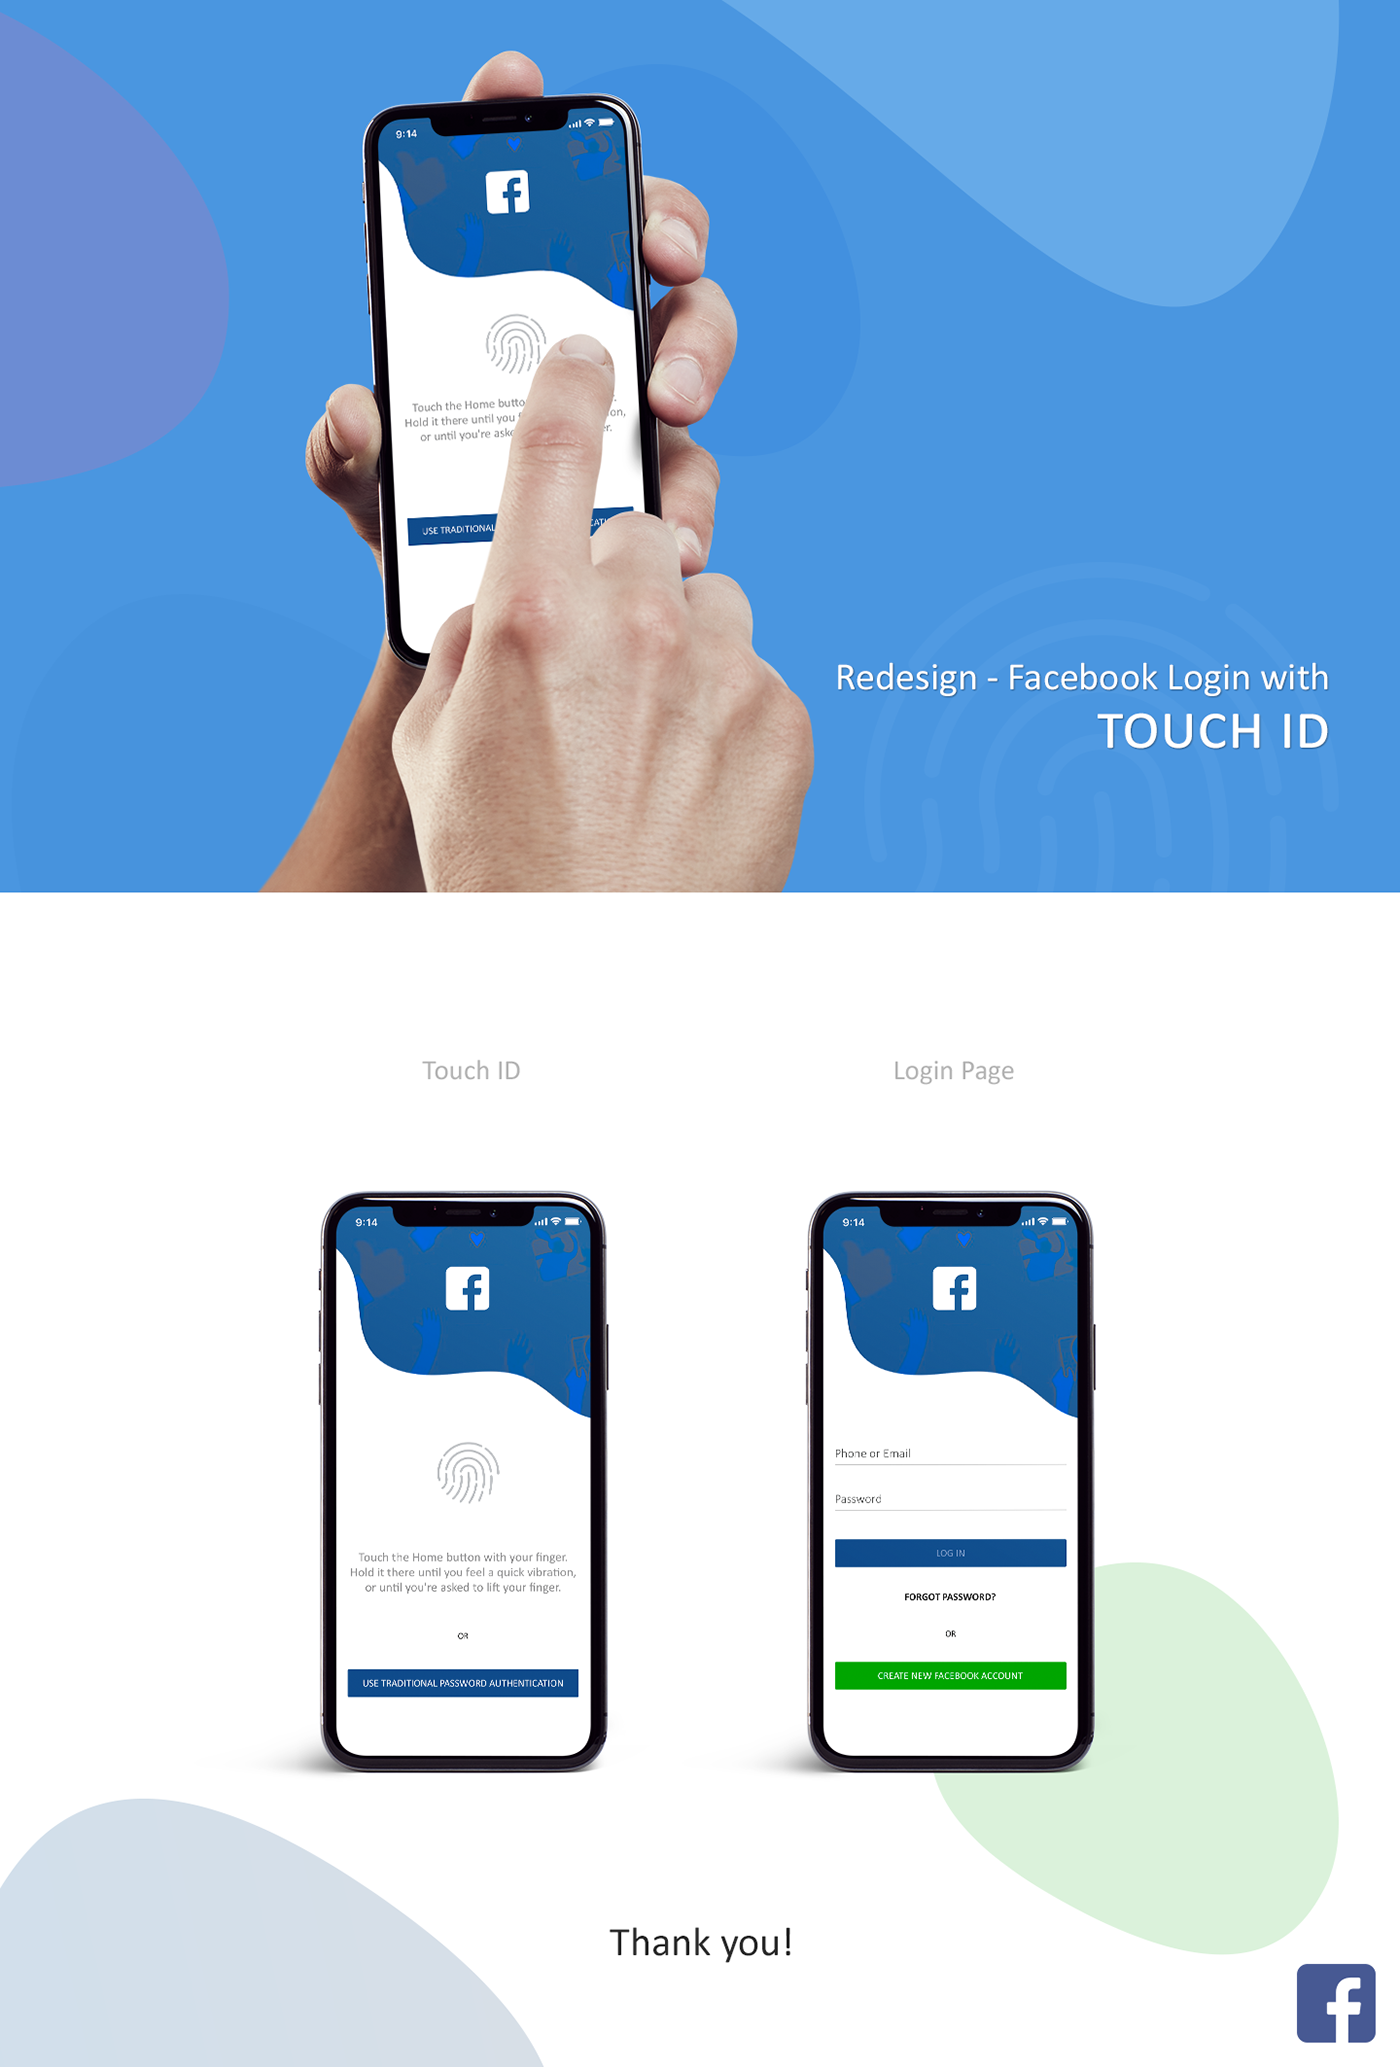 facebook login Touch ID login fb redesign ID Facebook Next Generation user experience social media concept